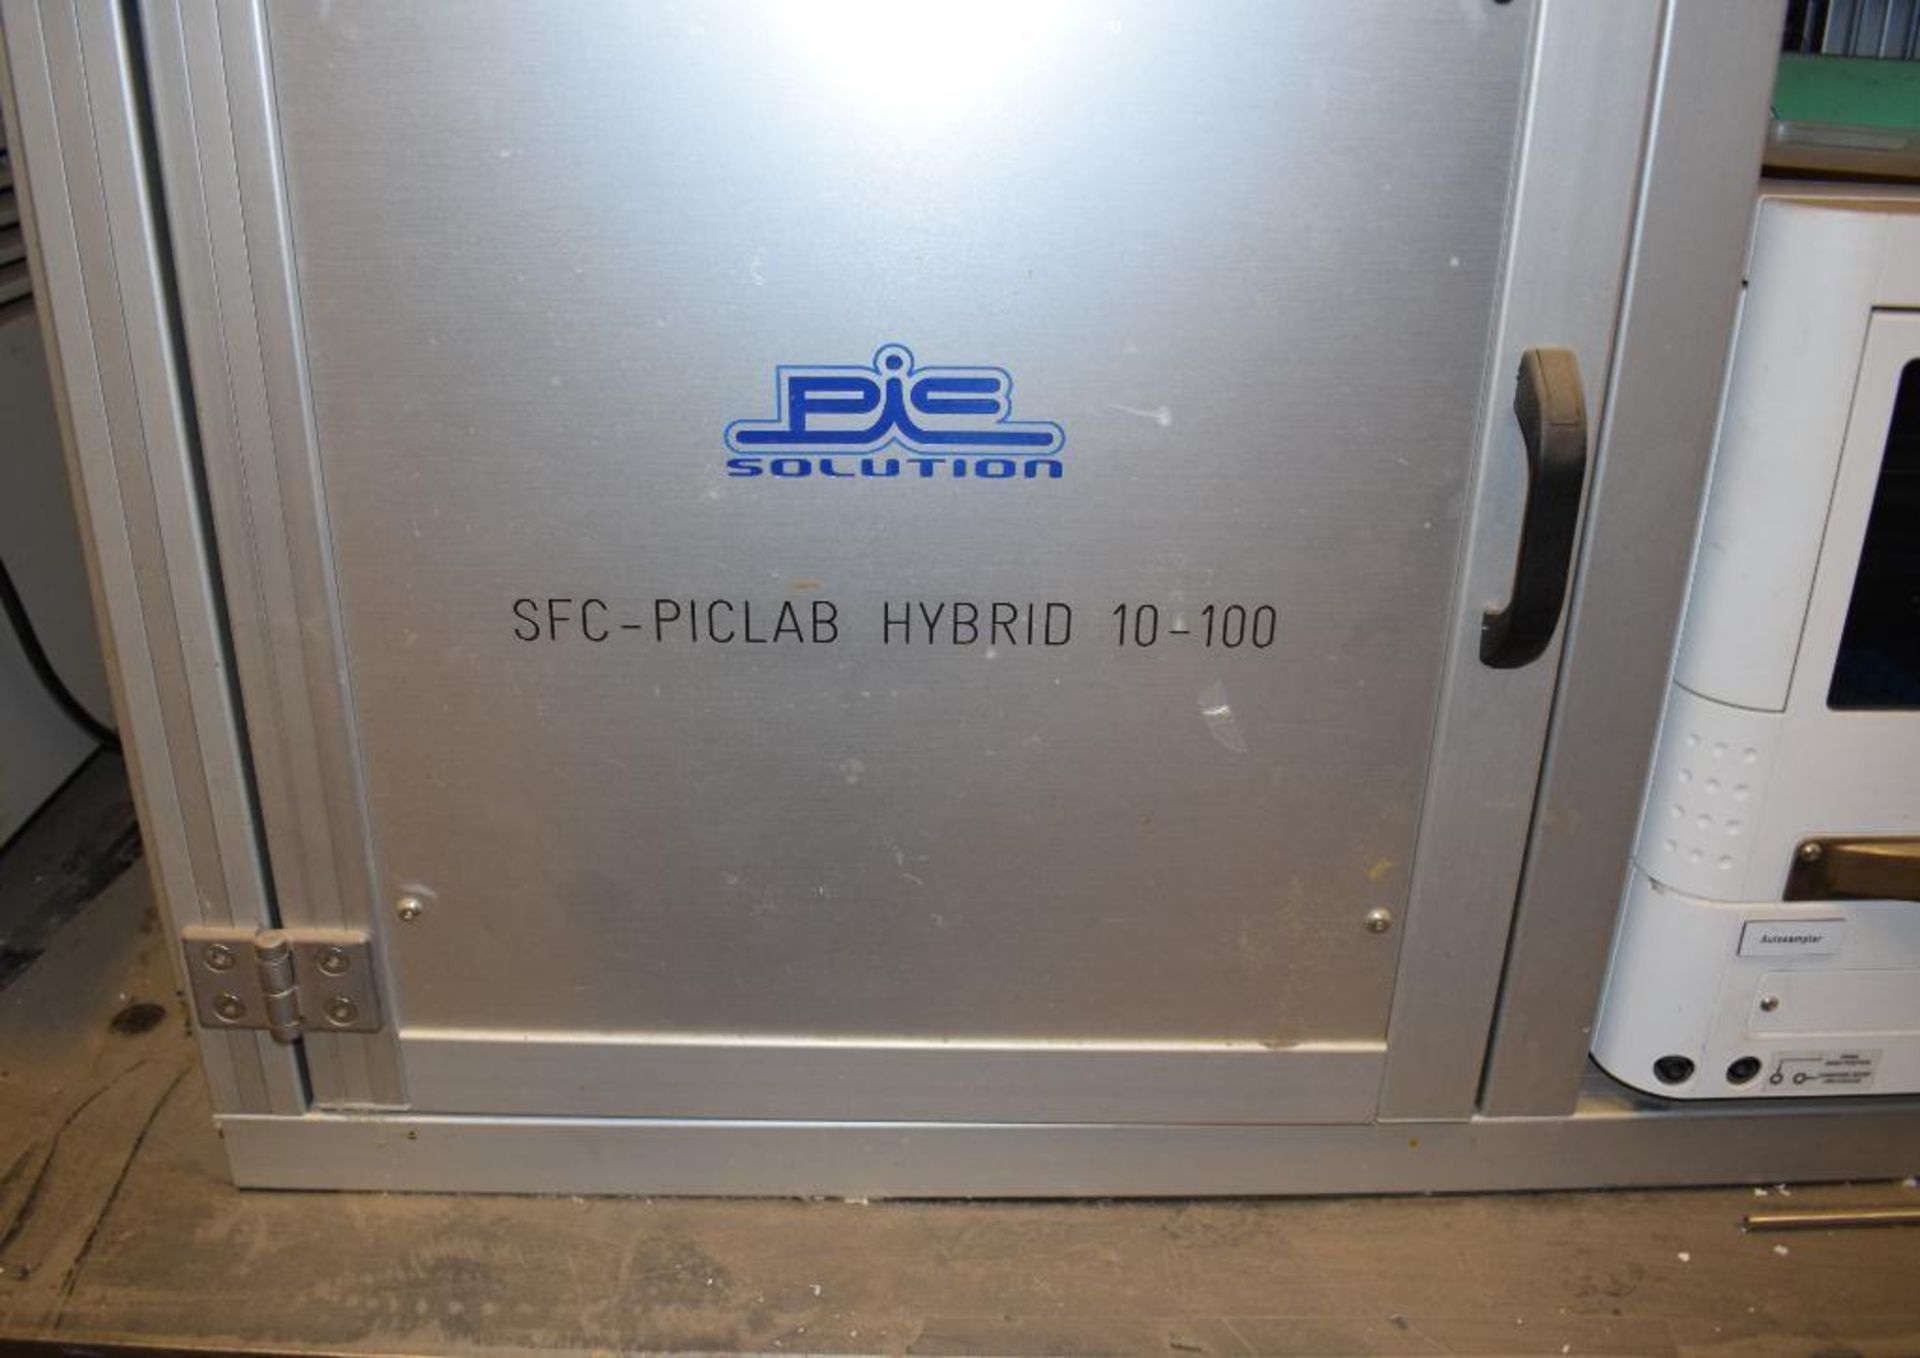 PIC Solution Hybrid Supercritical Fluid Chromatography System, Model SFC-PICLAB HYBRID 10-100. Seria - Image 4 of 8